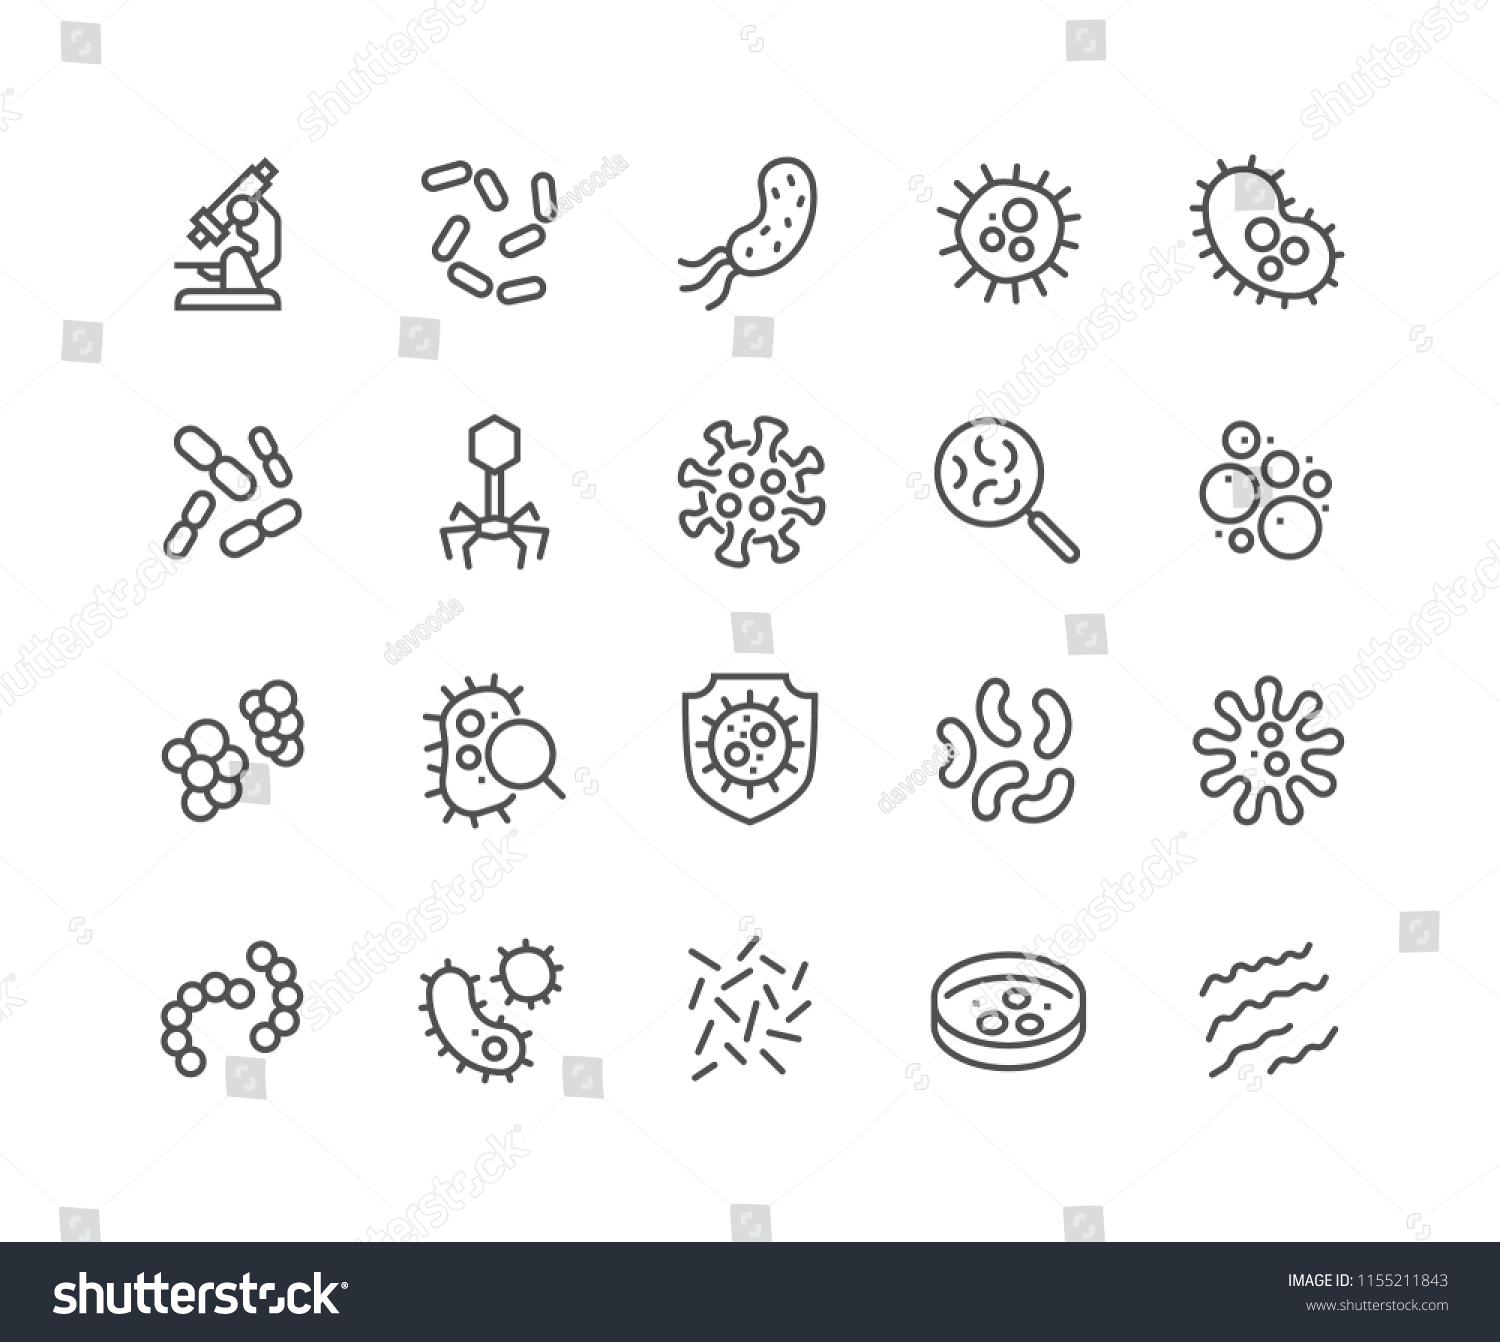 Simple Set of Bacteria Related Vector Line Icons. Contains such Icons as Virus, Colony of Bacteria, Petri Dish and more.
Editable Stroke. 48x48 Pixel Perfect. #1155211843